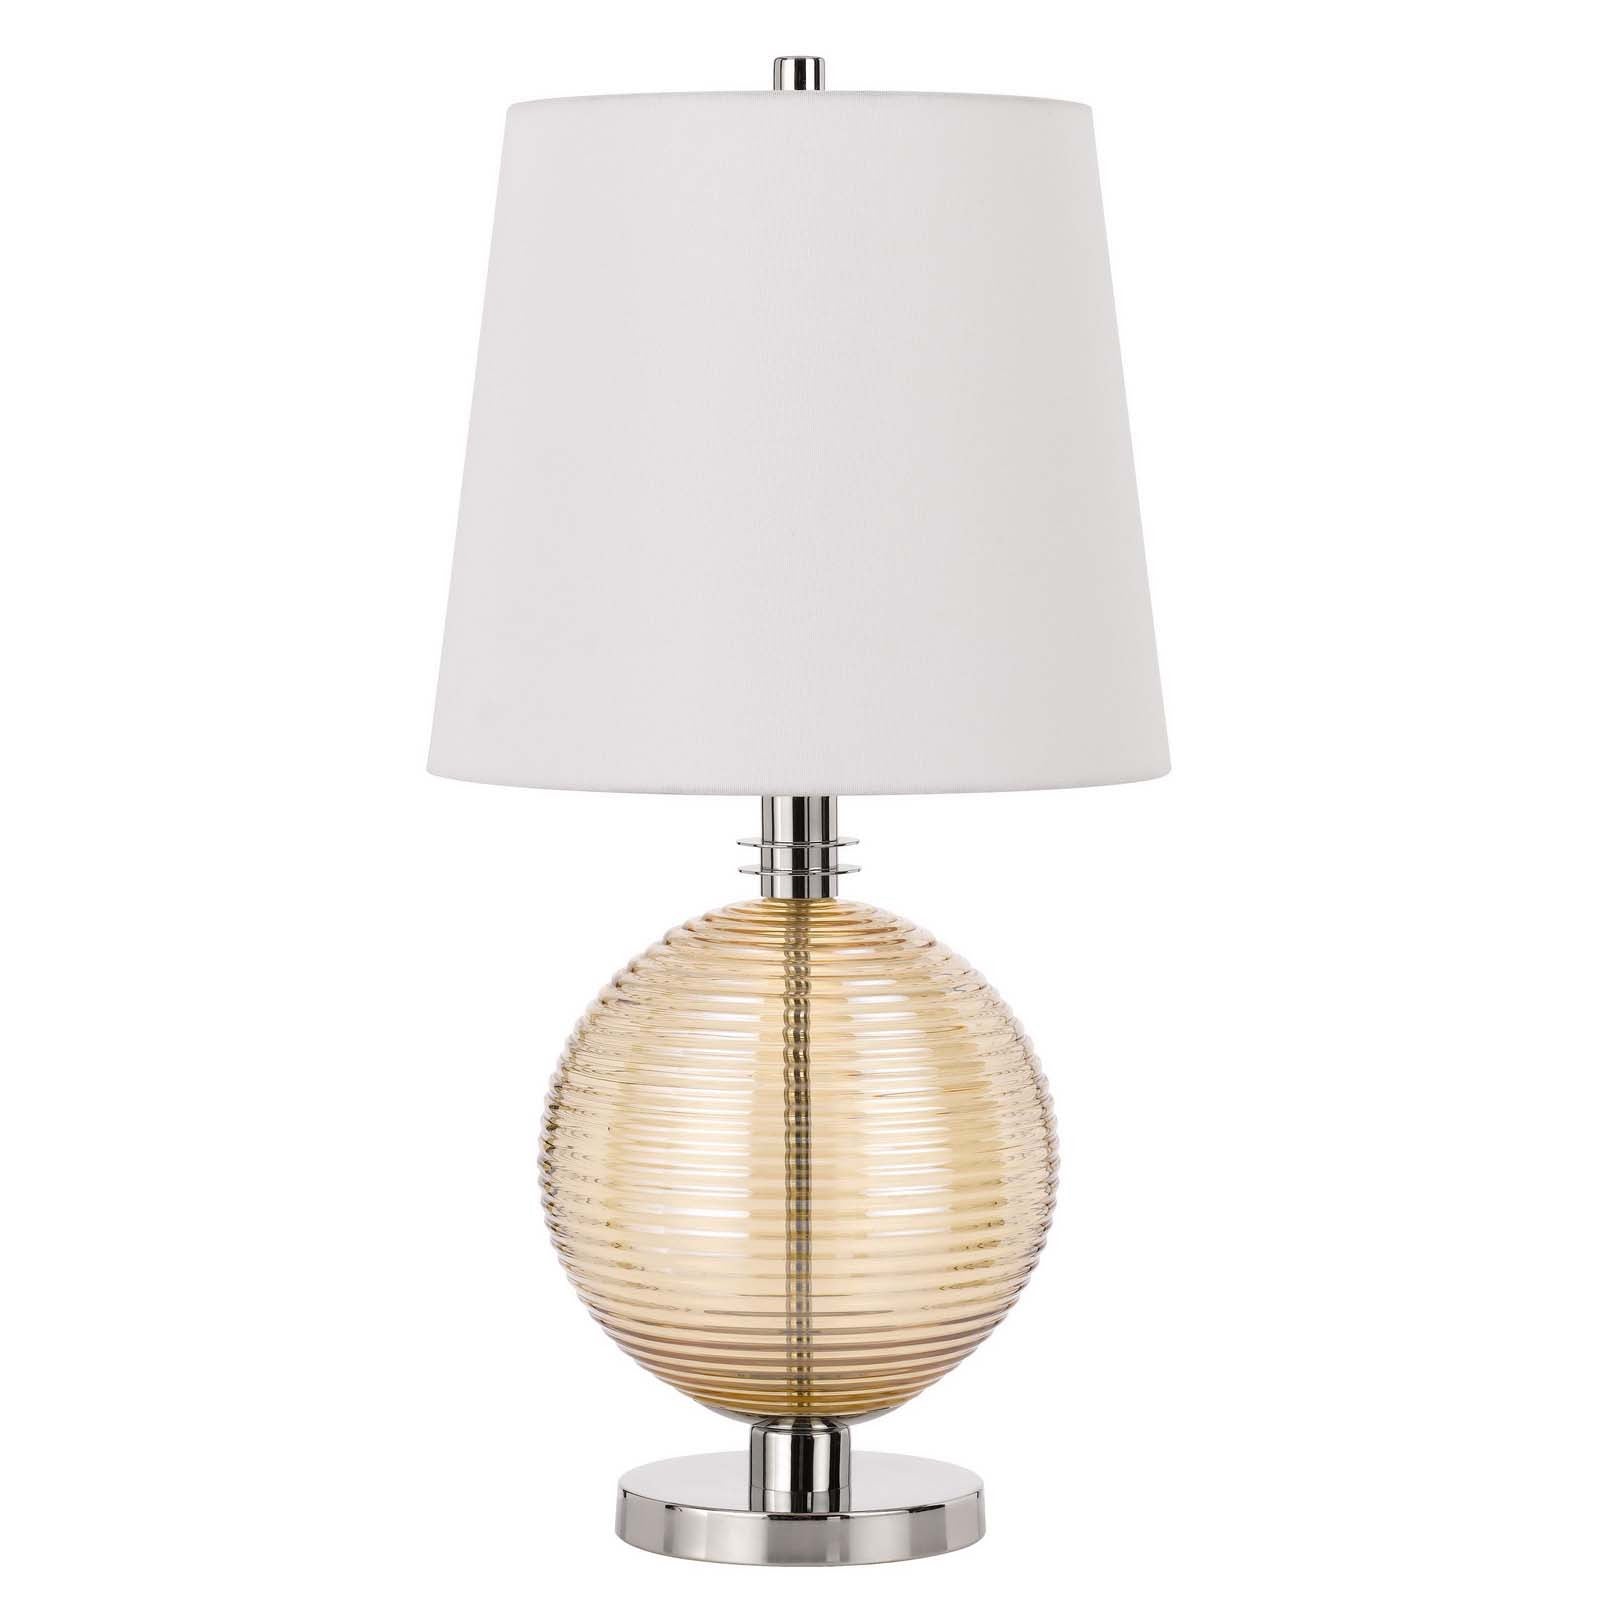 28" Nickel Metal Table Lamp With White Empire Shade